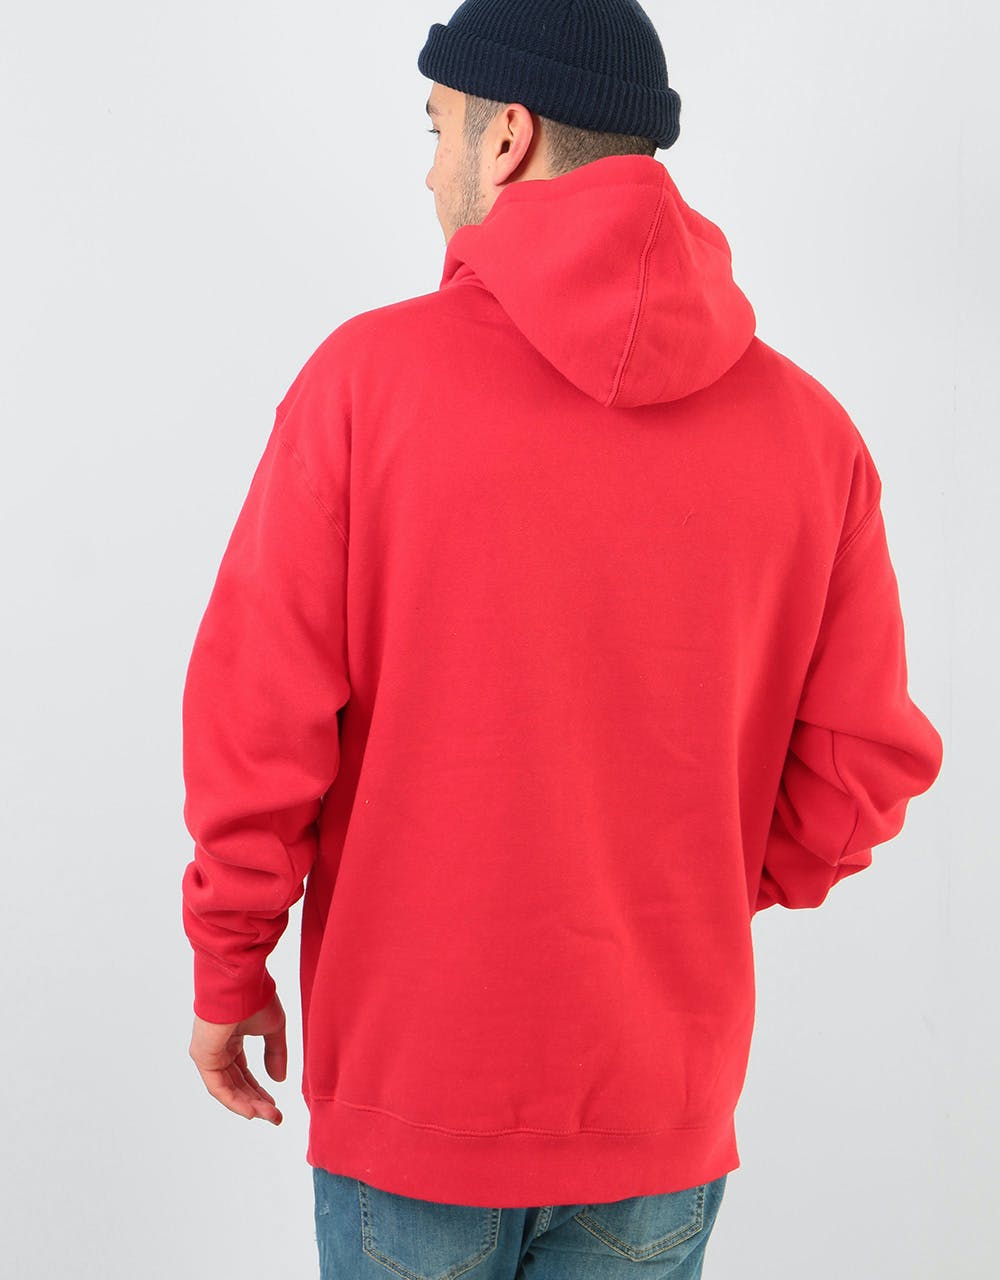 Manor Penny Pullover Hoodie - Red